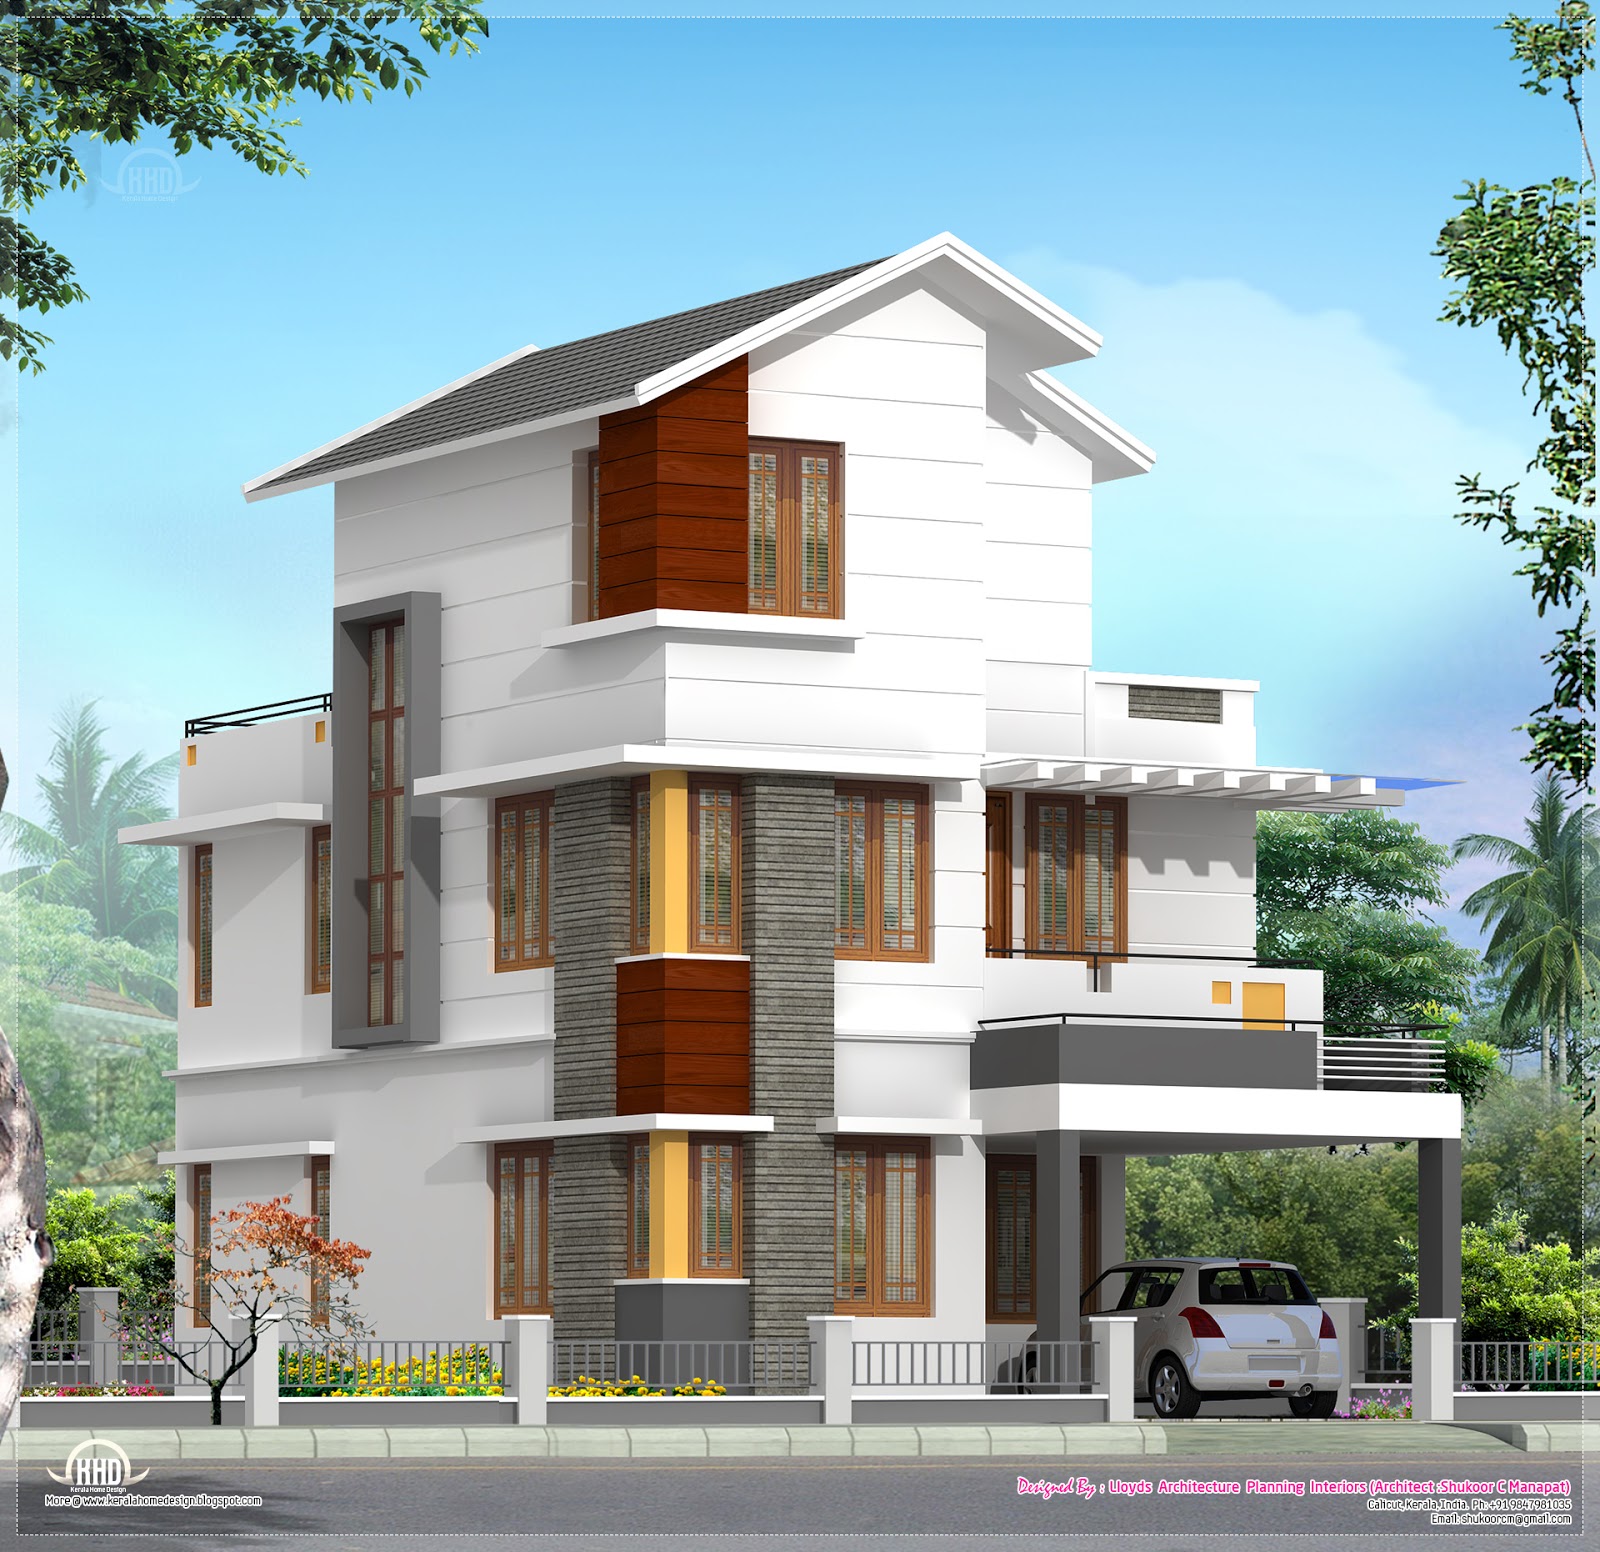 4 Bedroom House Plan In Less Than 3 Cents Kerala Home Design And throughout Elegant  low budget minimalist house architecture kerala pertaining to Invigorate